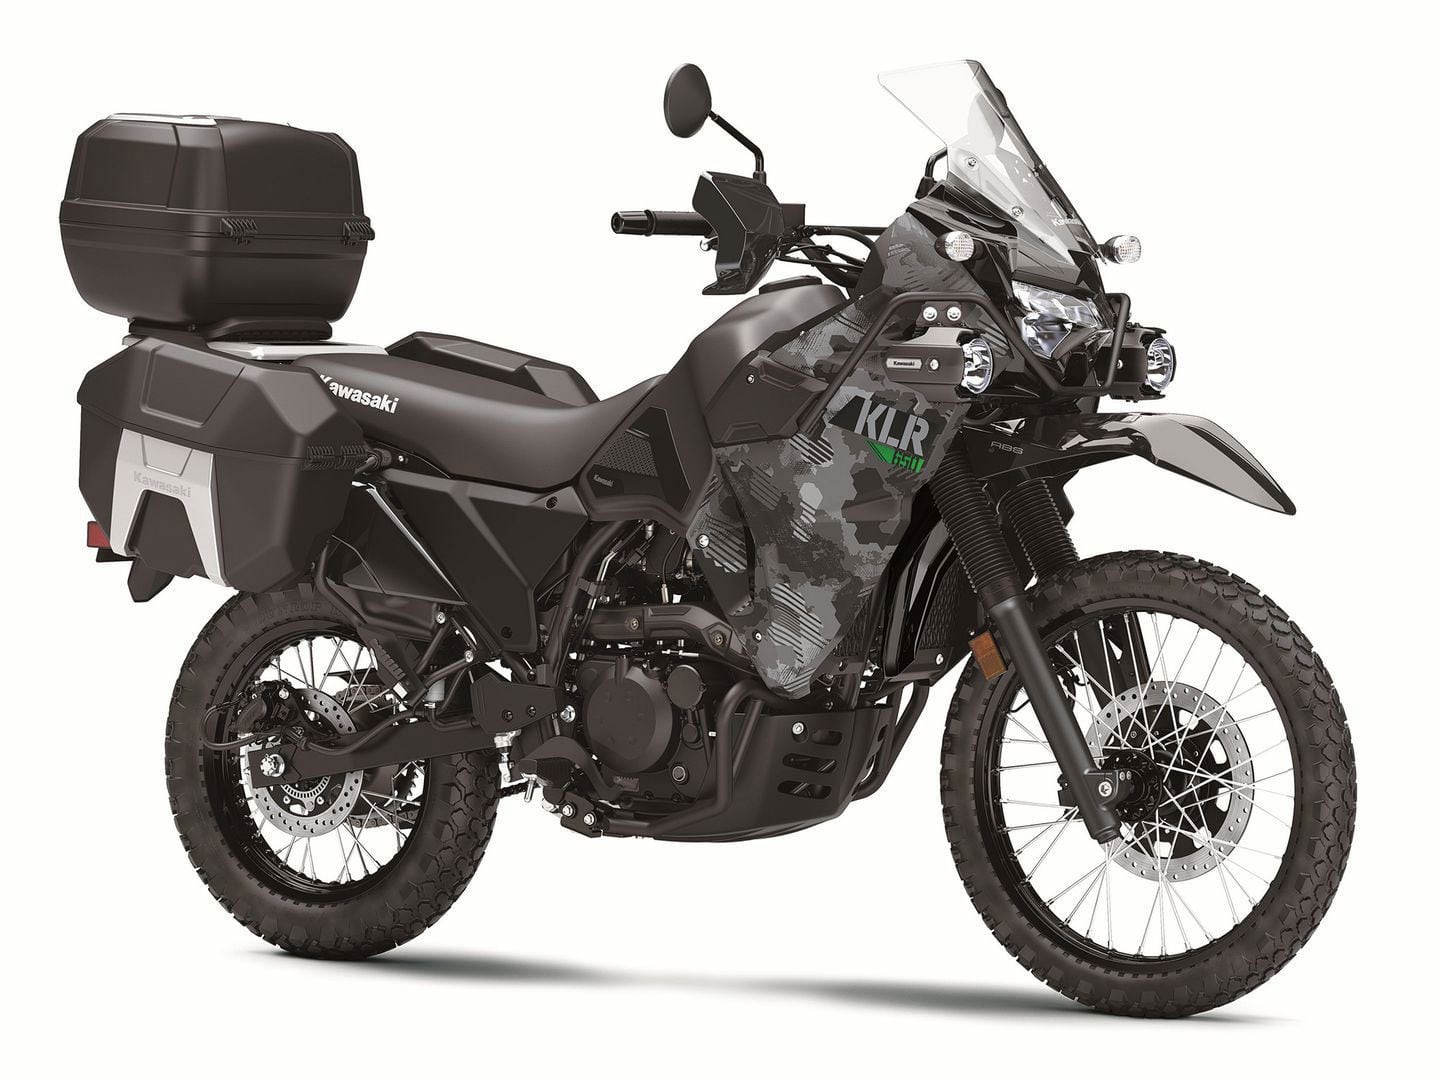 Kawasaki’s KLR650 soldiers on as the OG affordable adventurer even after receiving modern updates like fuel injection and off-road-tuned ABS. Even the most feature-laden version, the KLR650 Adventure ABS, comes in well under the $9,000 price cutoff.